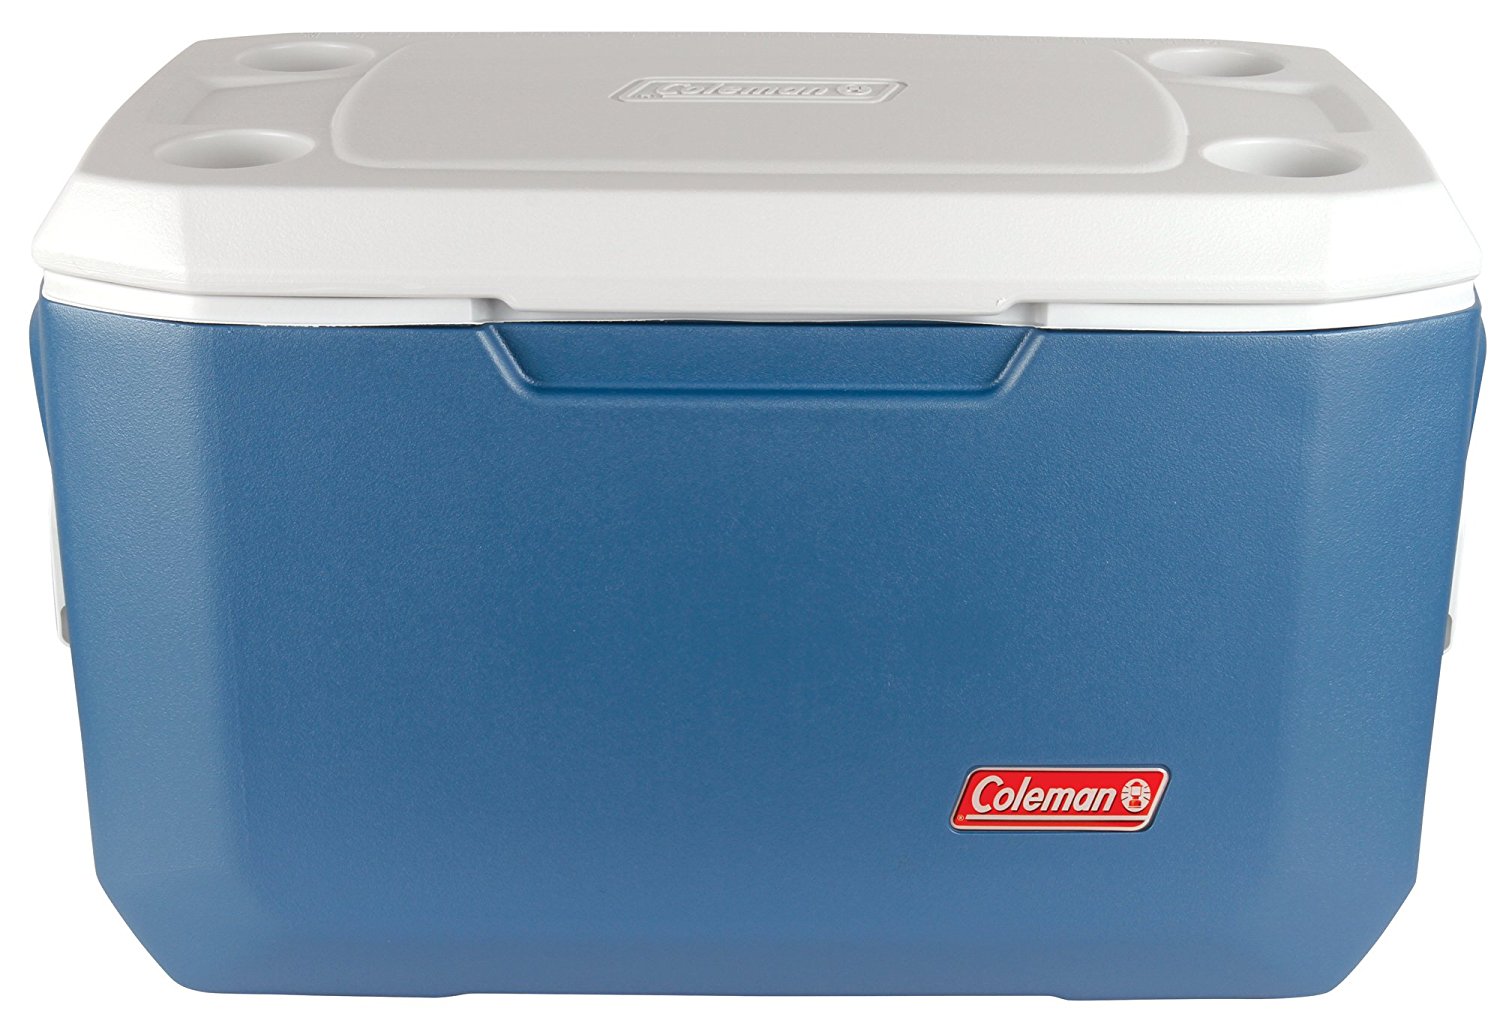 Best Budget Coolers